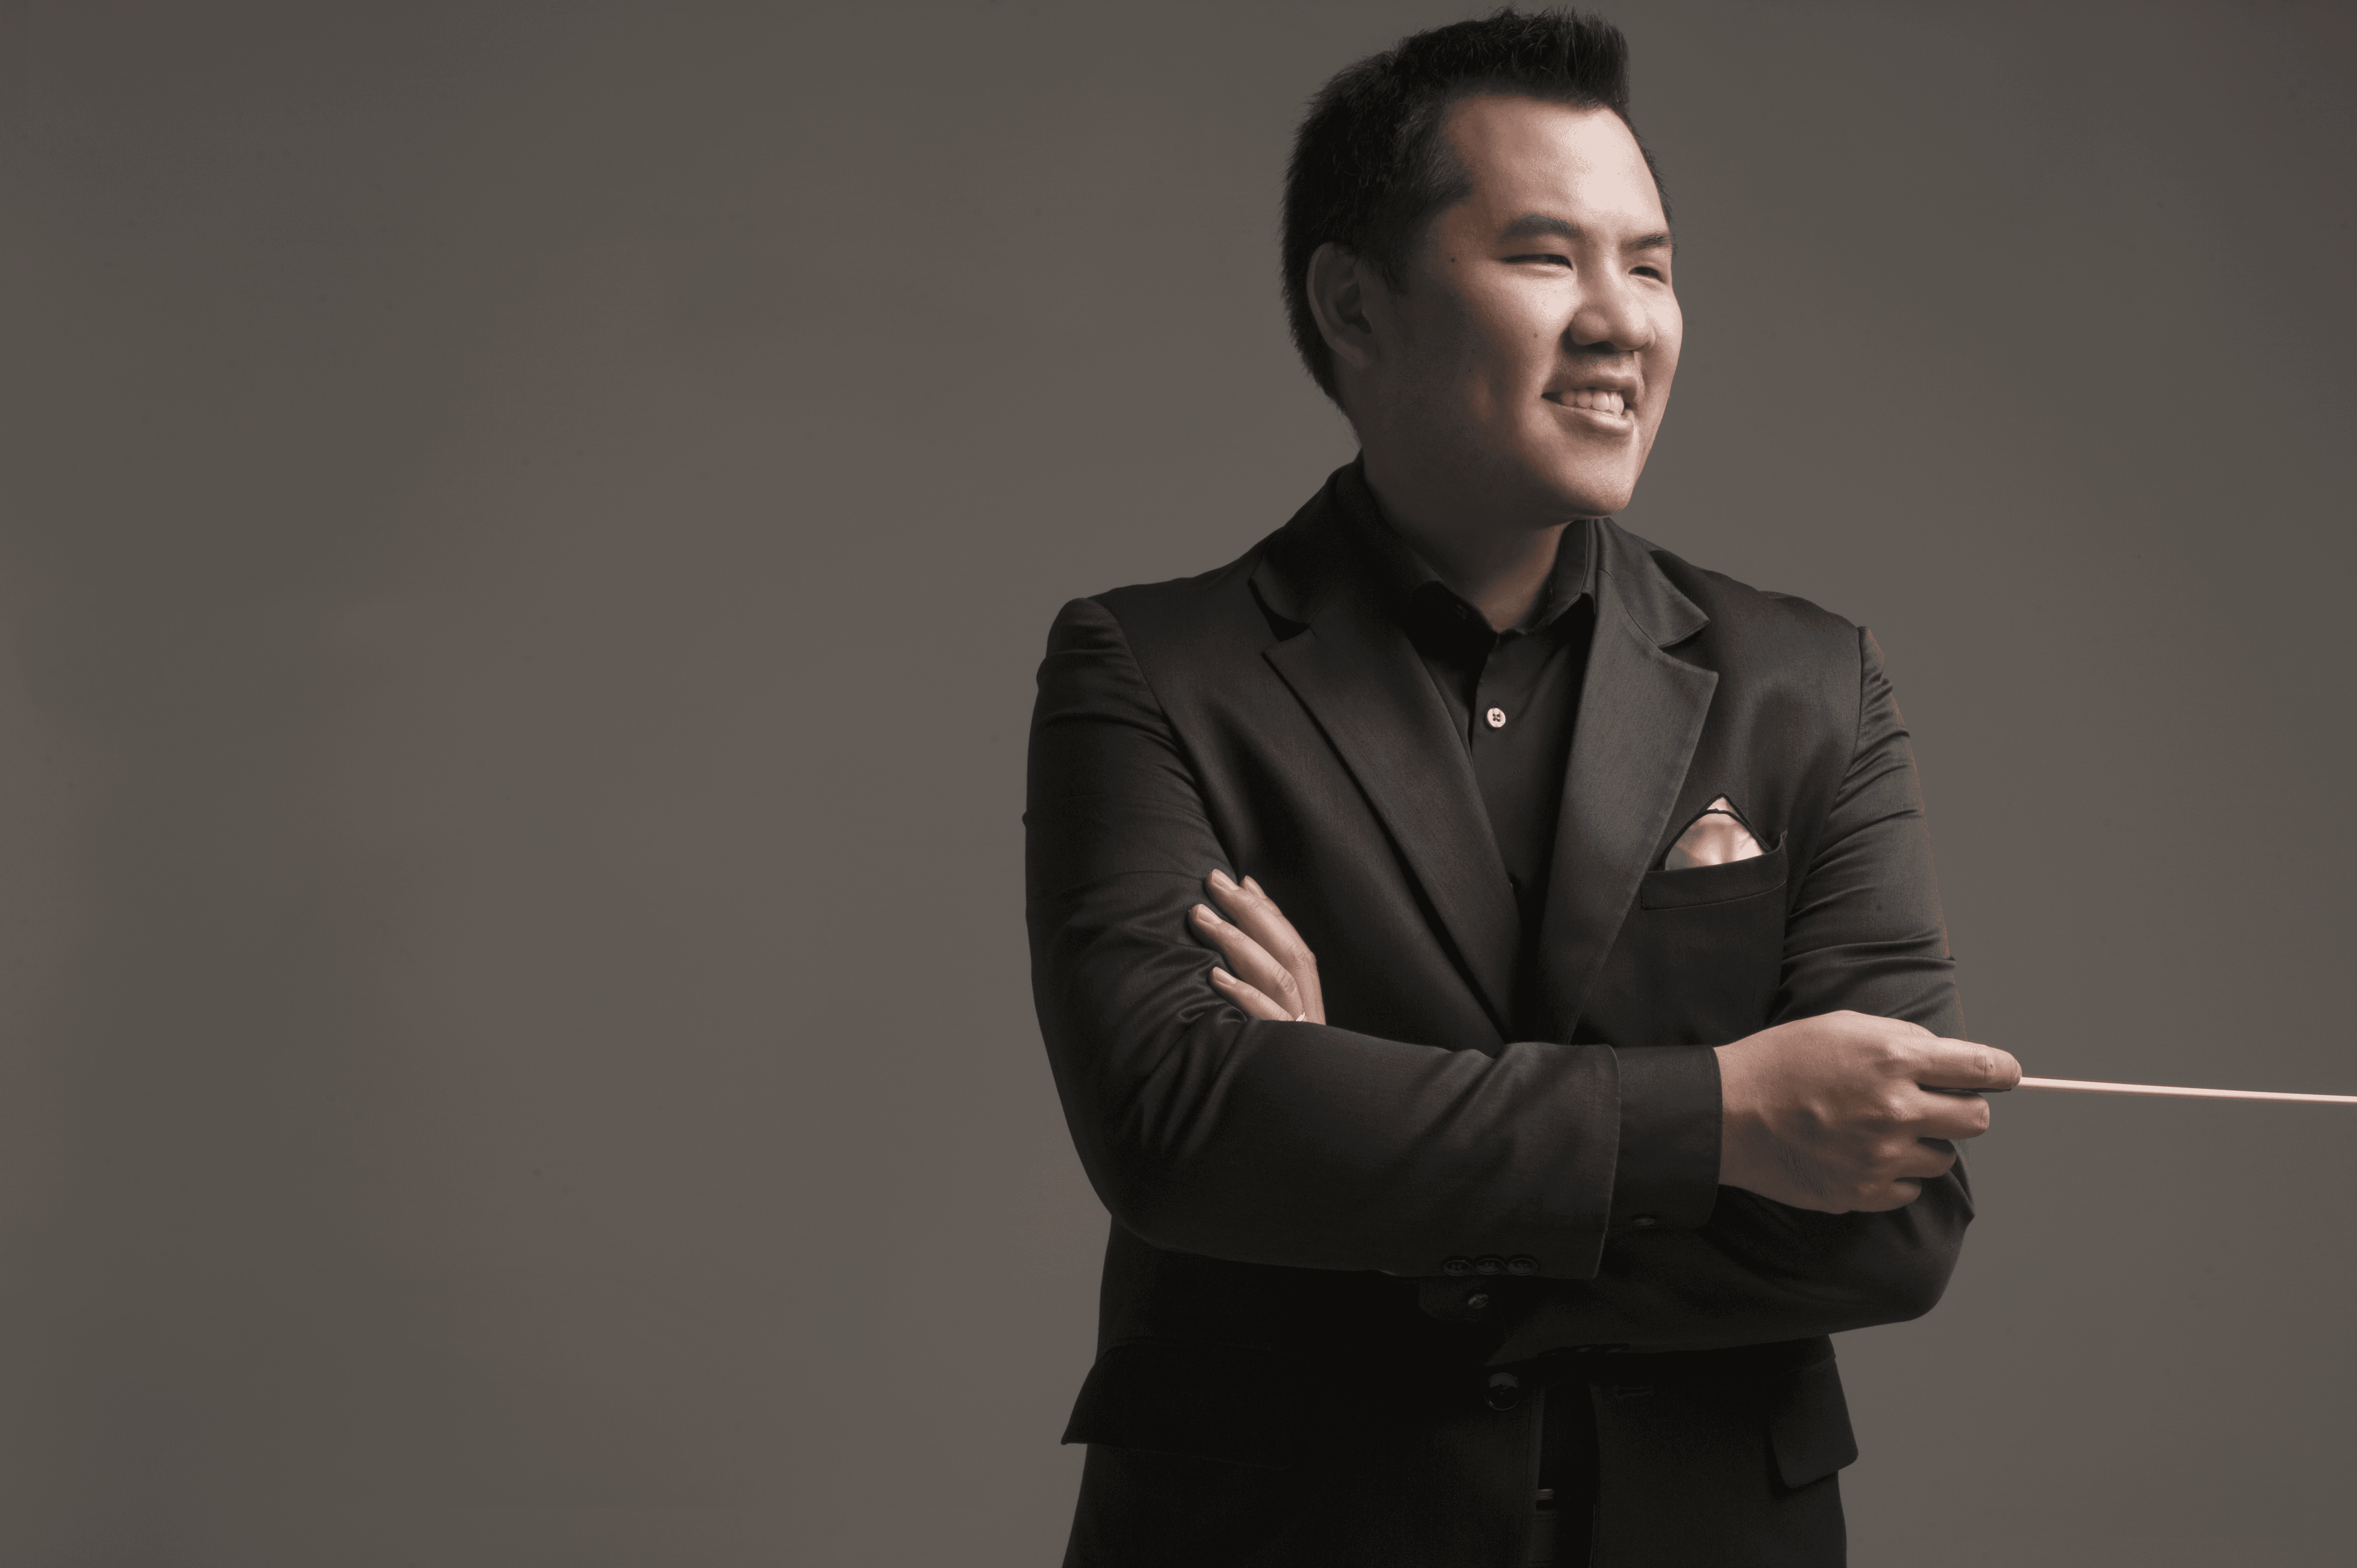 Wilbur Lin joins Colorado Symphony as Assistant Conductor and DYAO as Music Director beginning August 2023